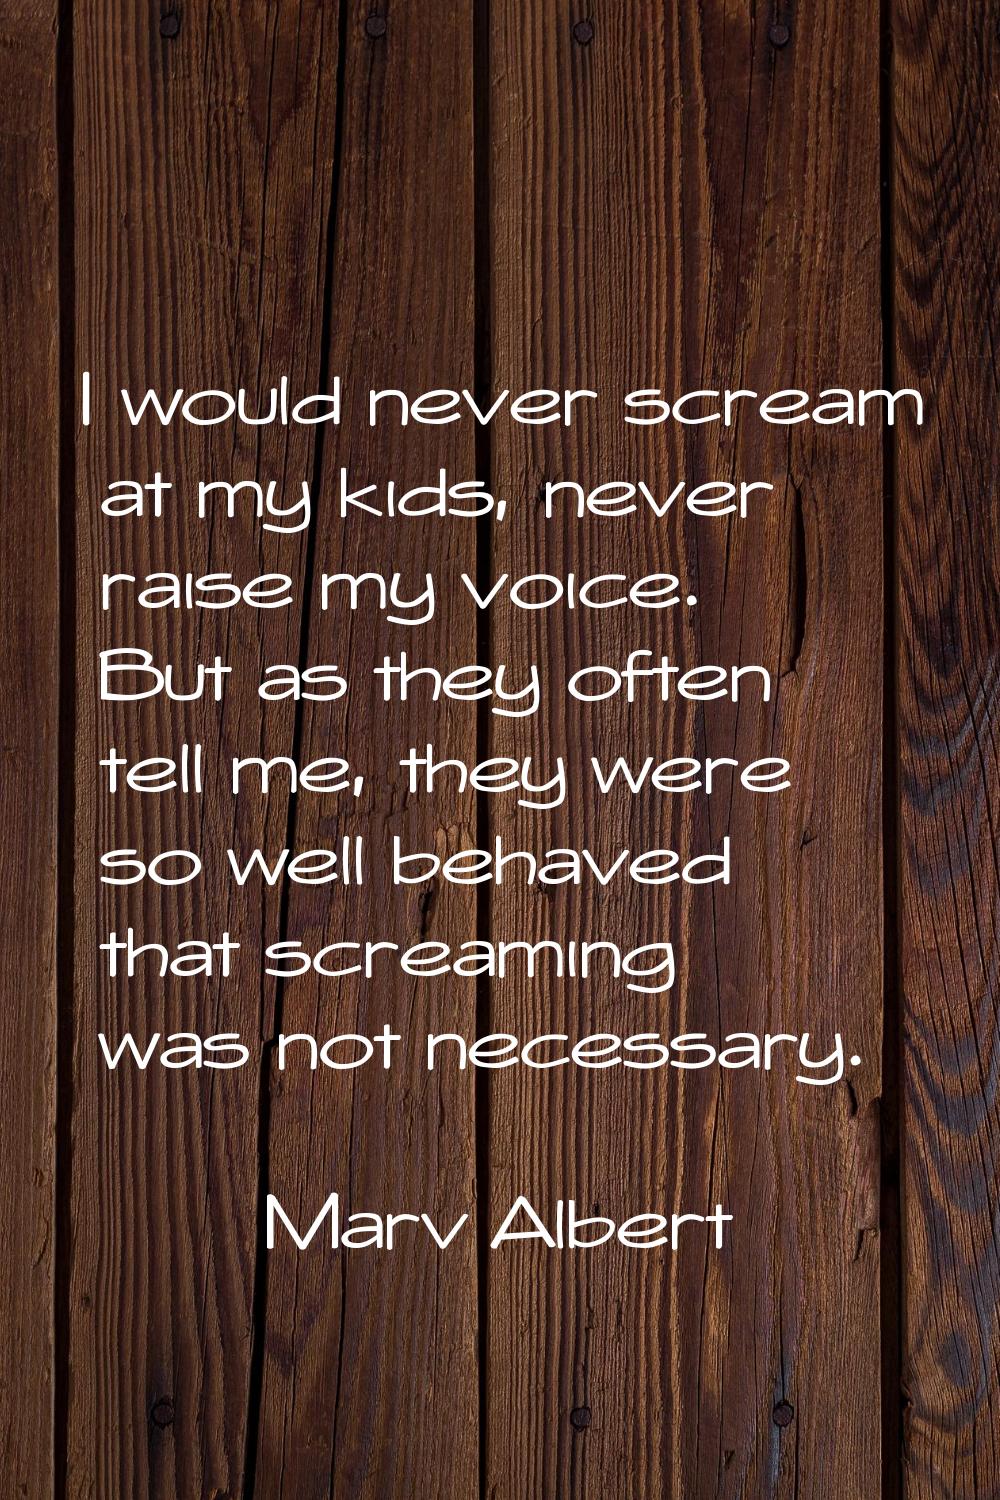 I would never scream at my kids, never raise my voice. But as they often tell me, they were so well